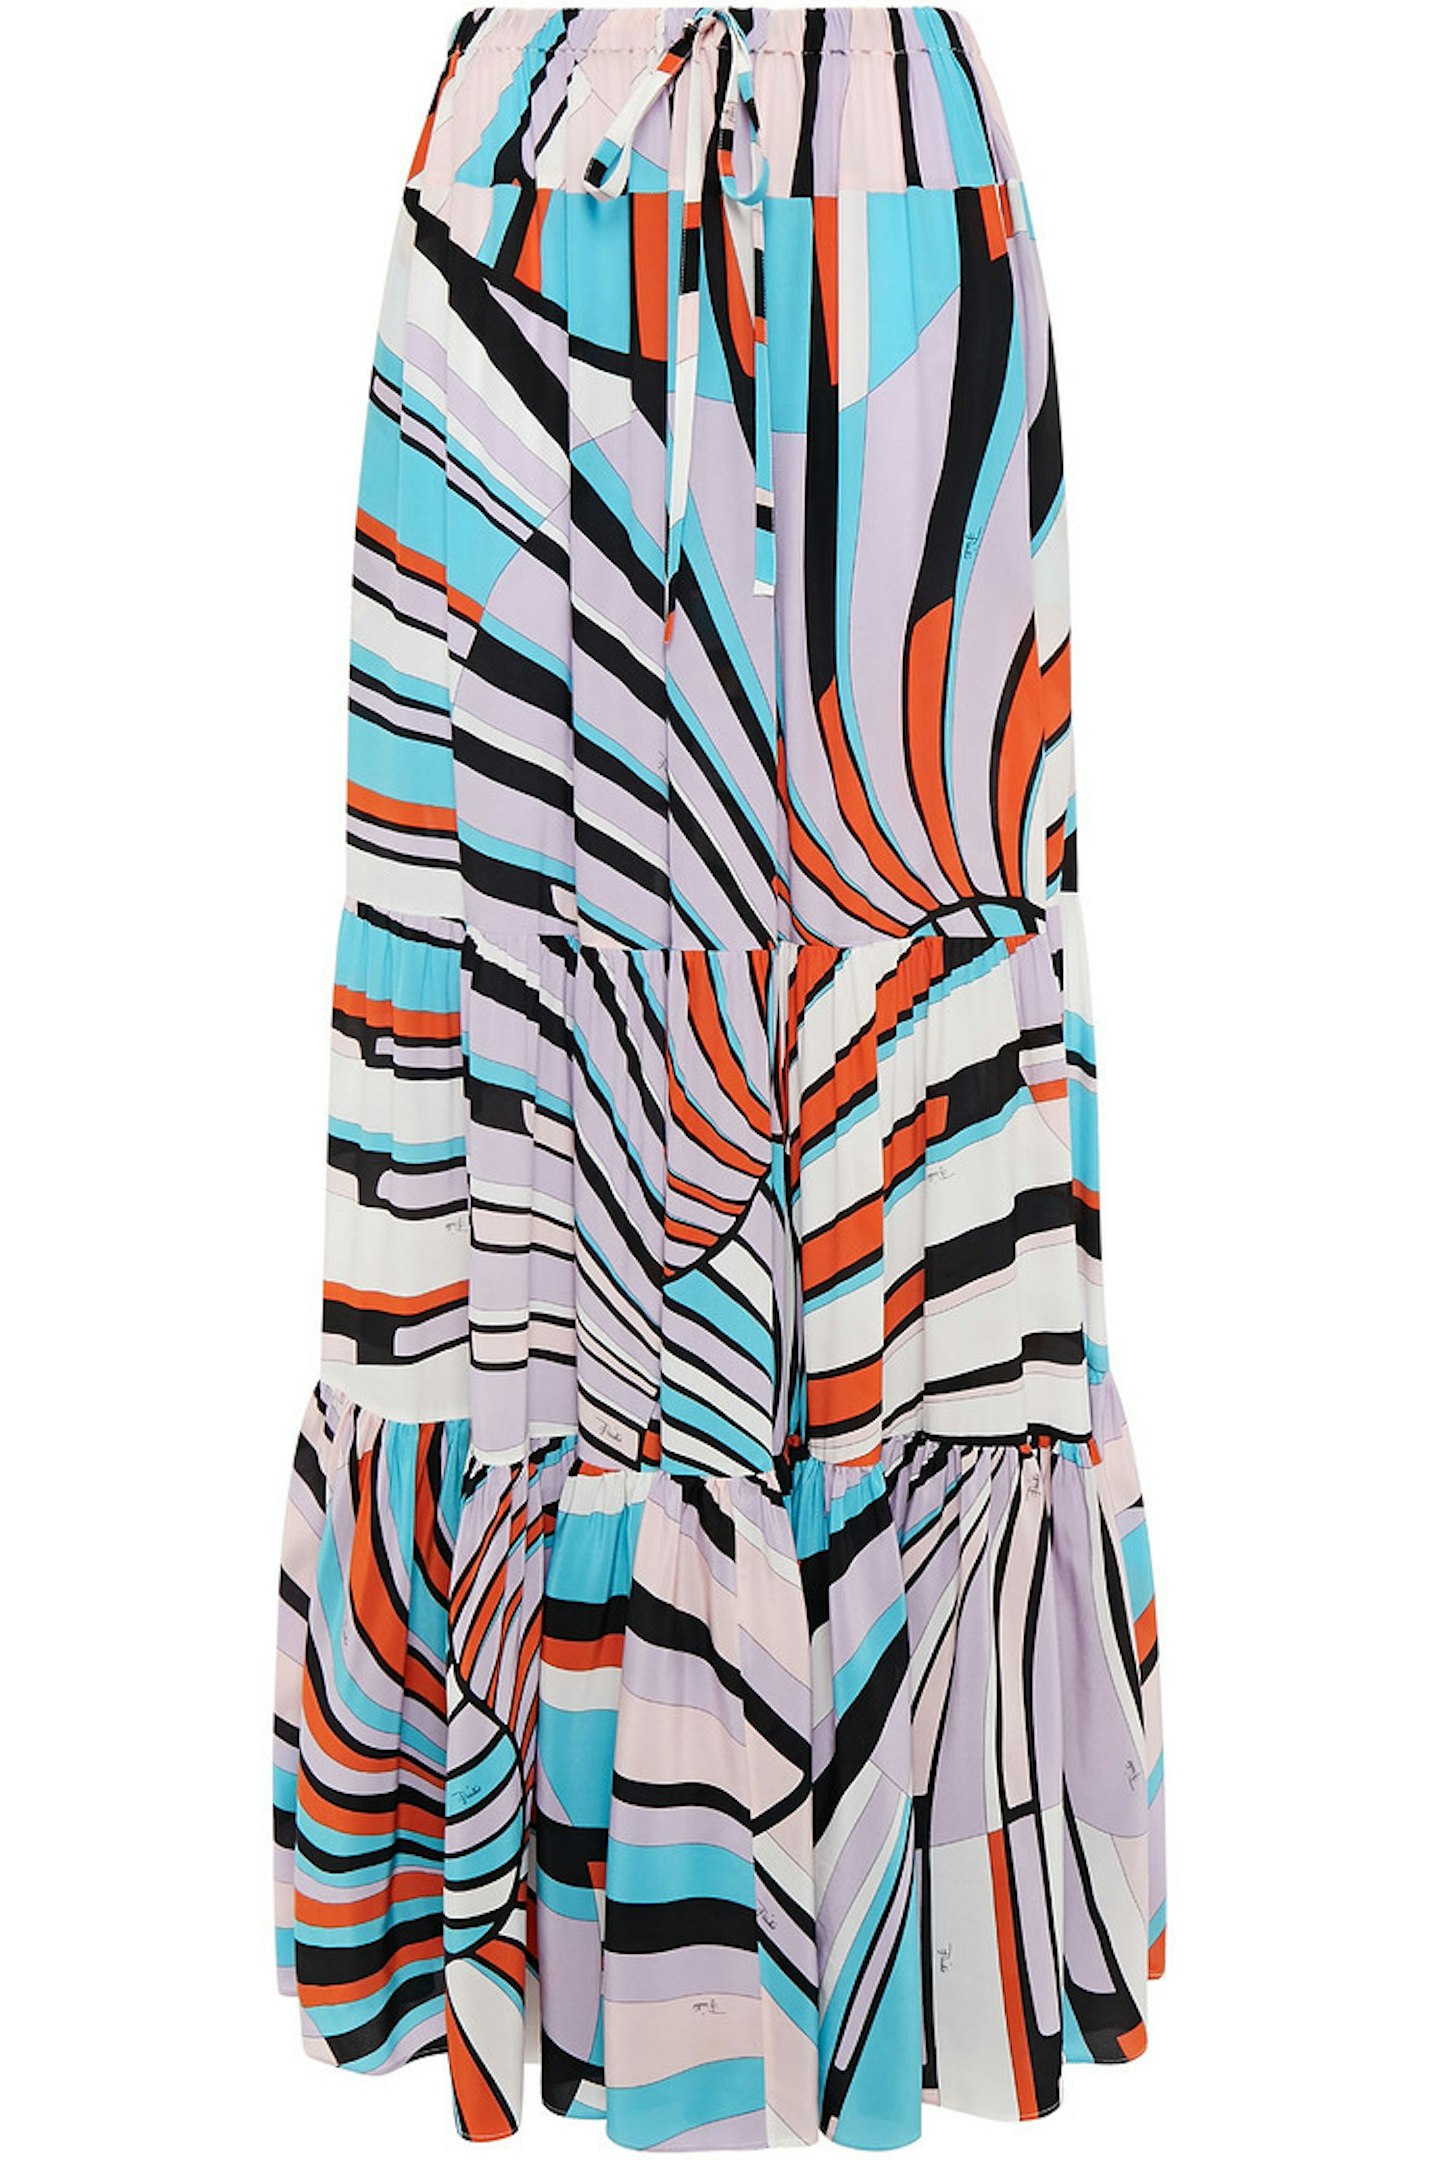 Emilio Pucci, Tiered printed silk crepe de chine maxi skirt,  WAS £562, NOW £338